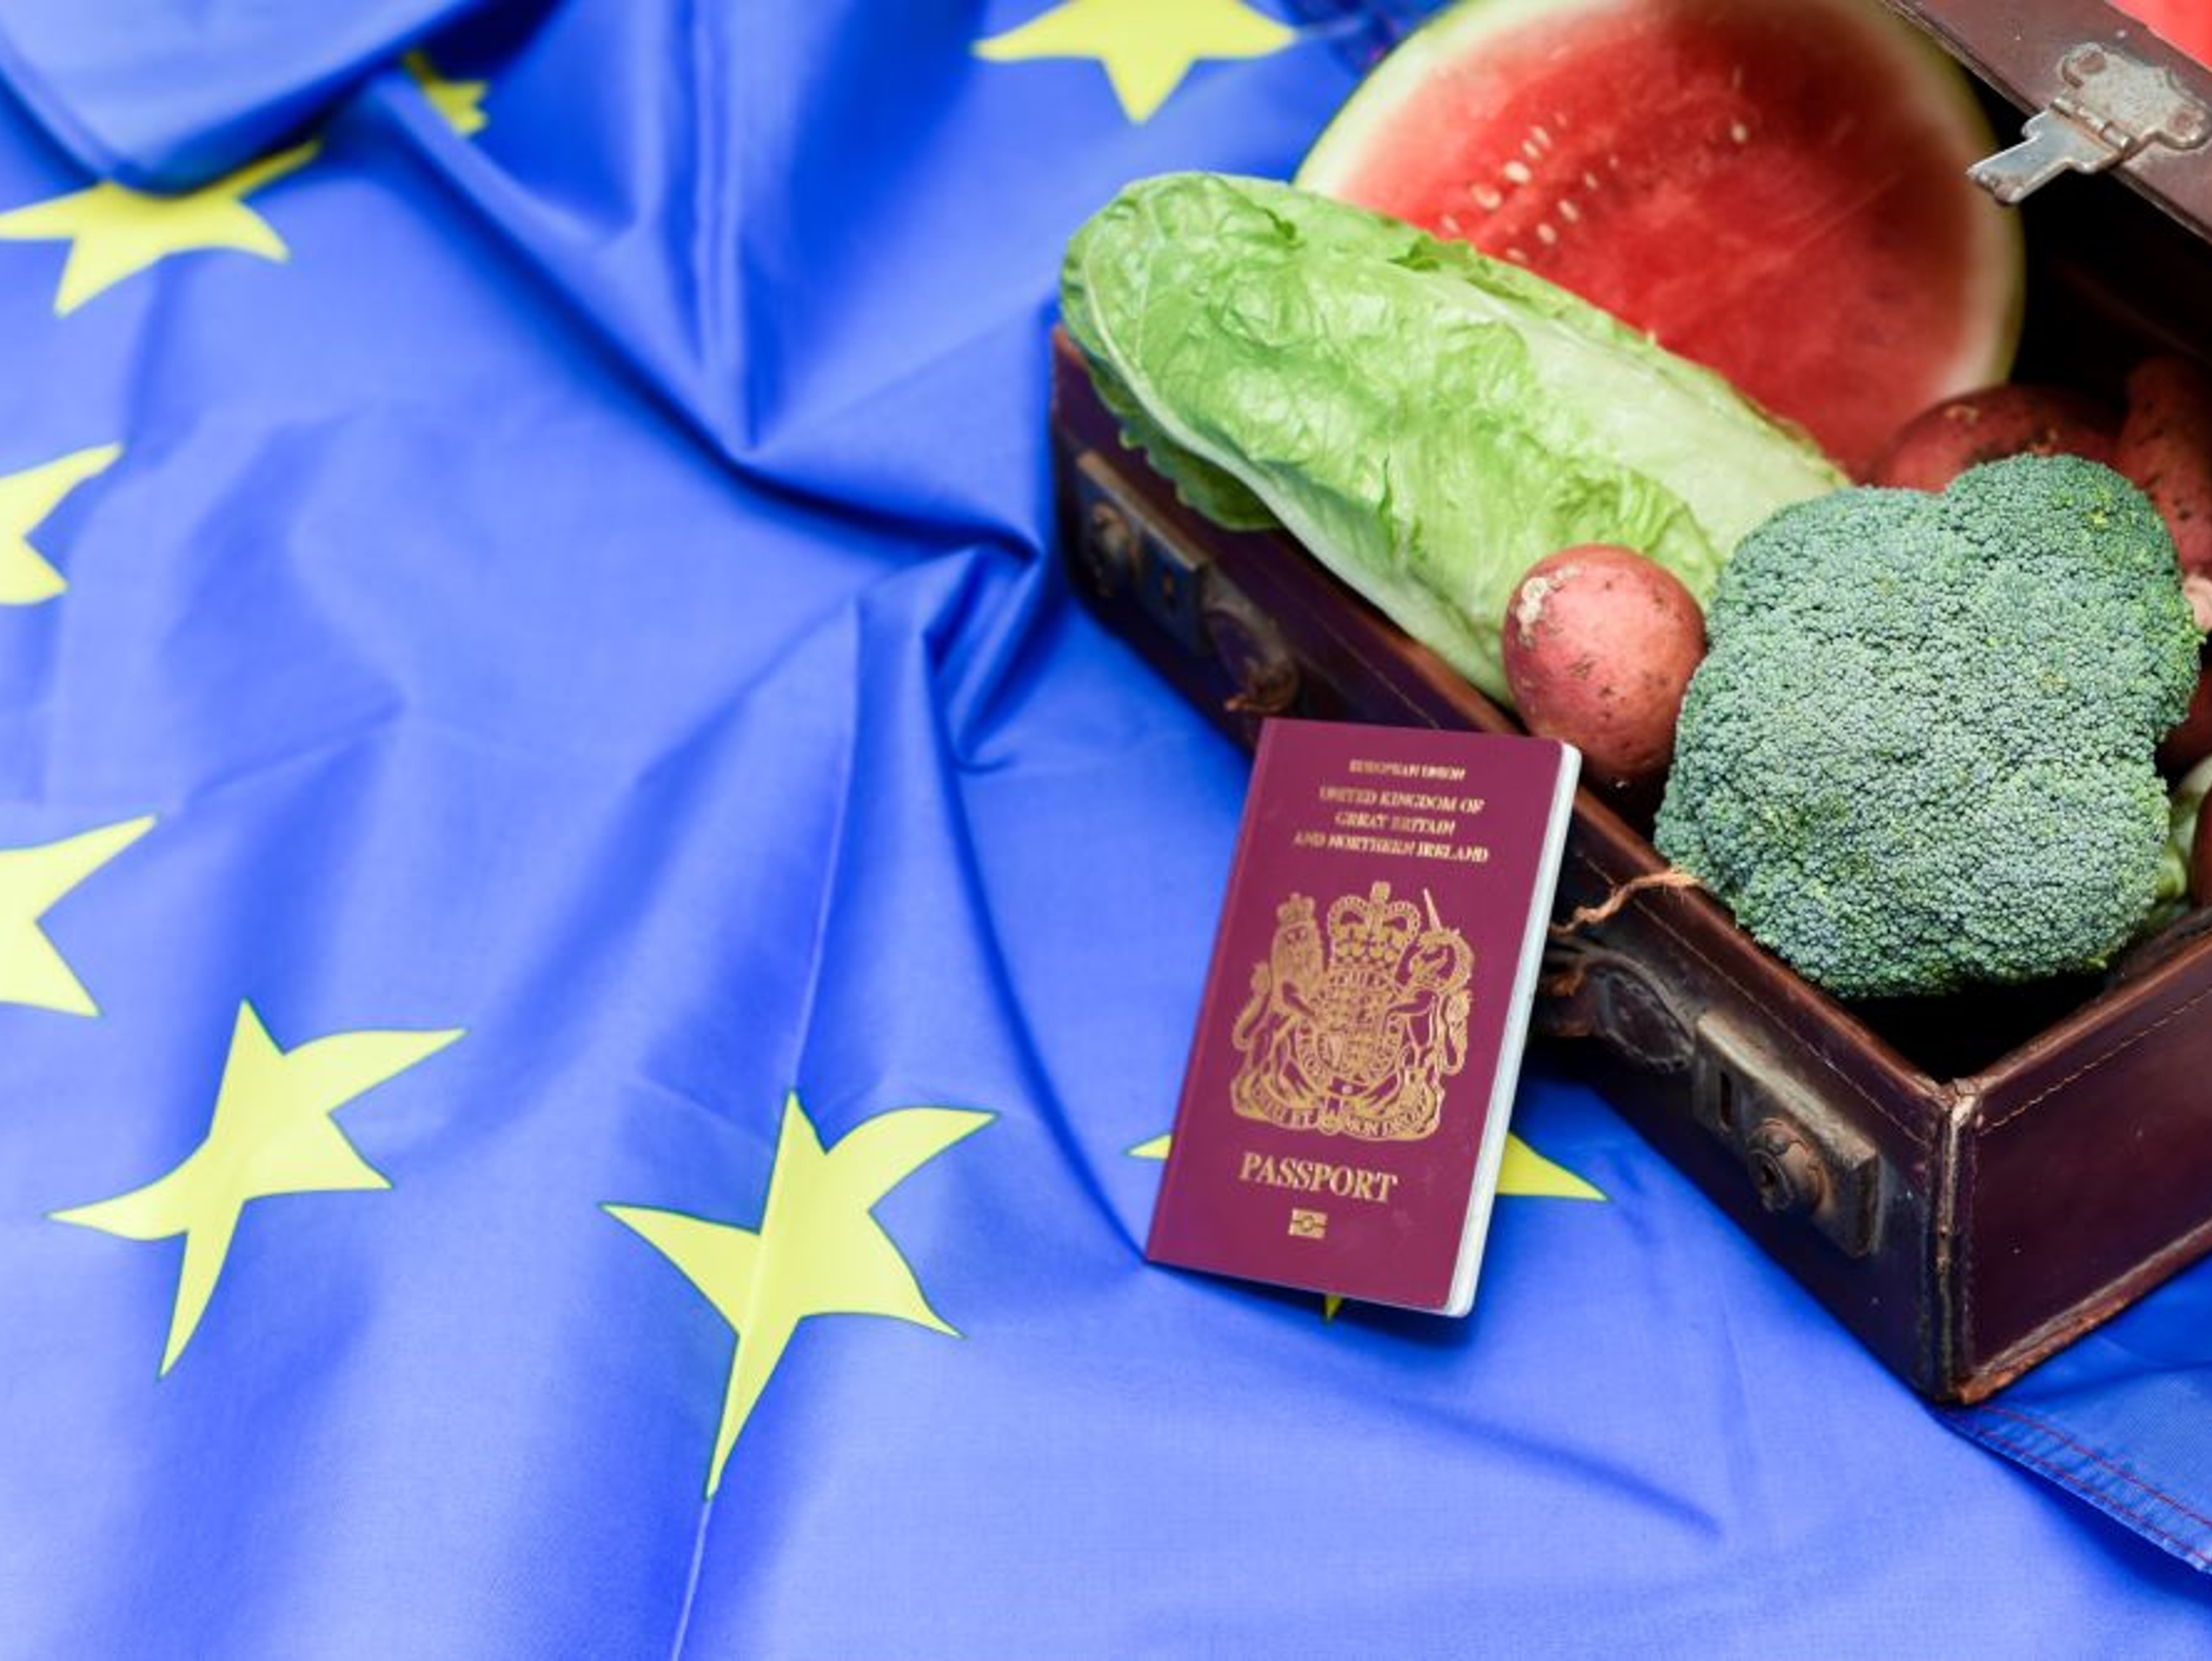 SPS goods in front of British passport and EU flag